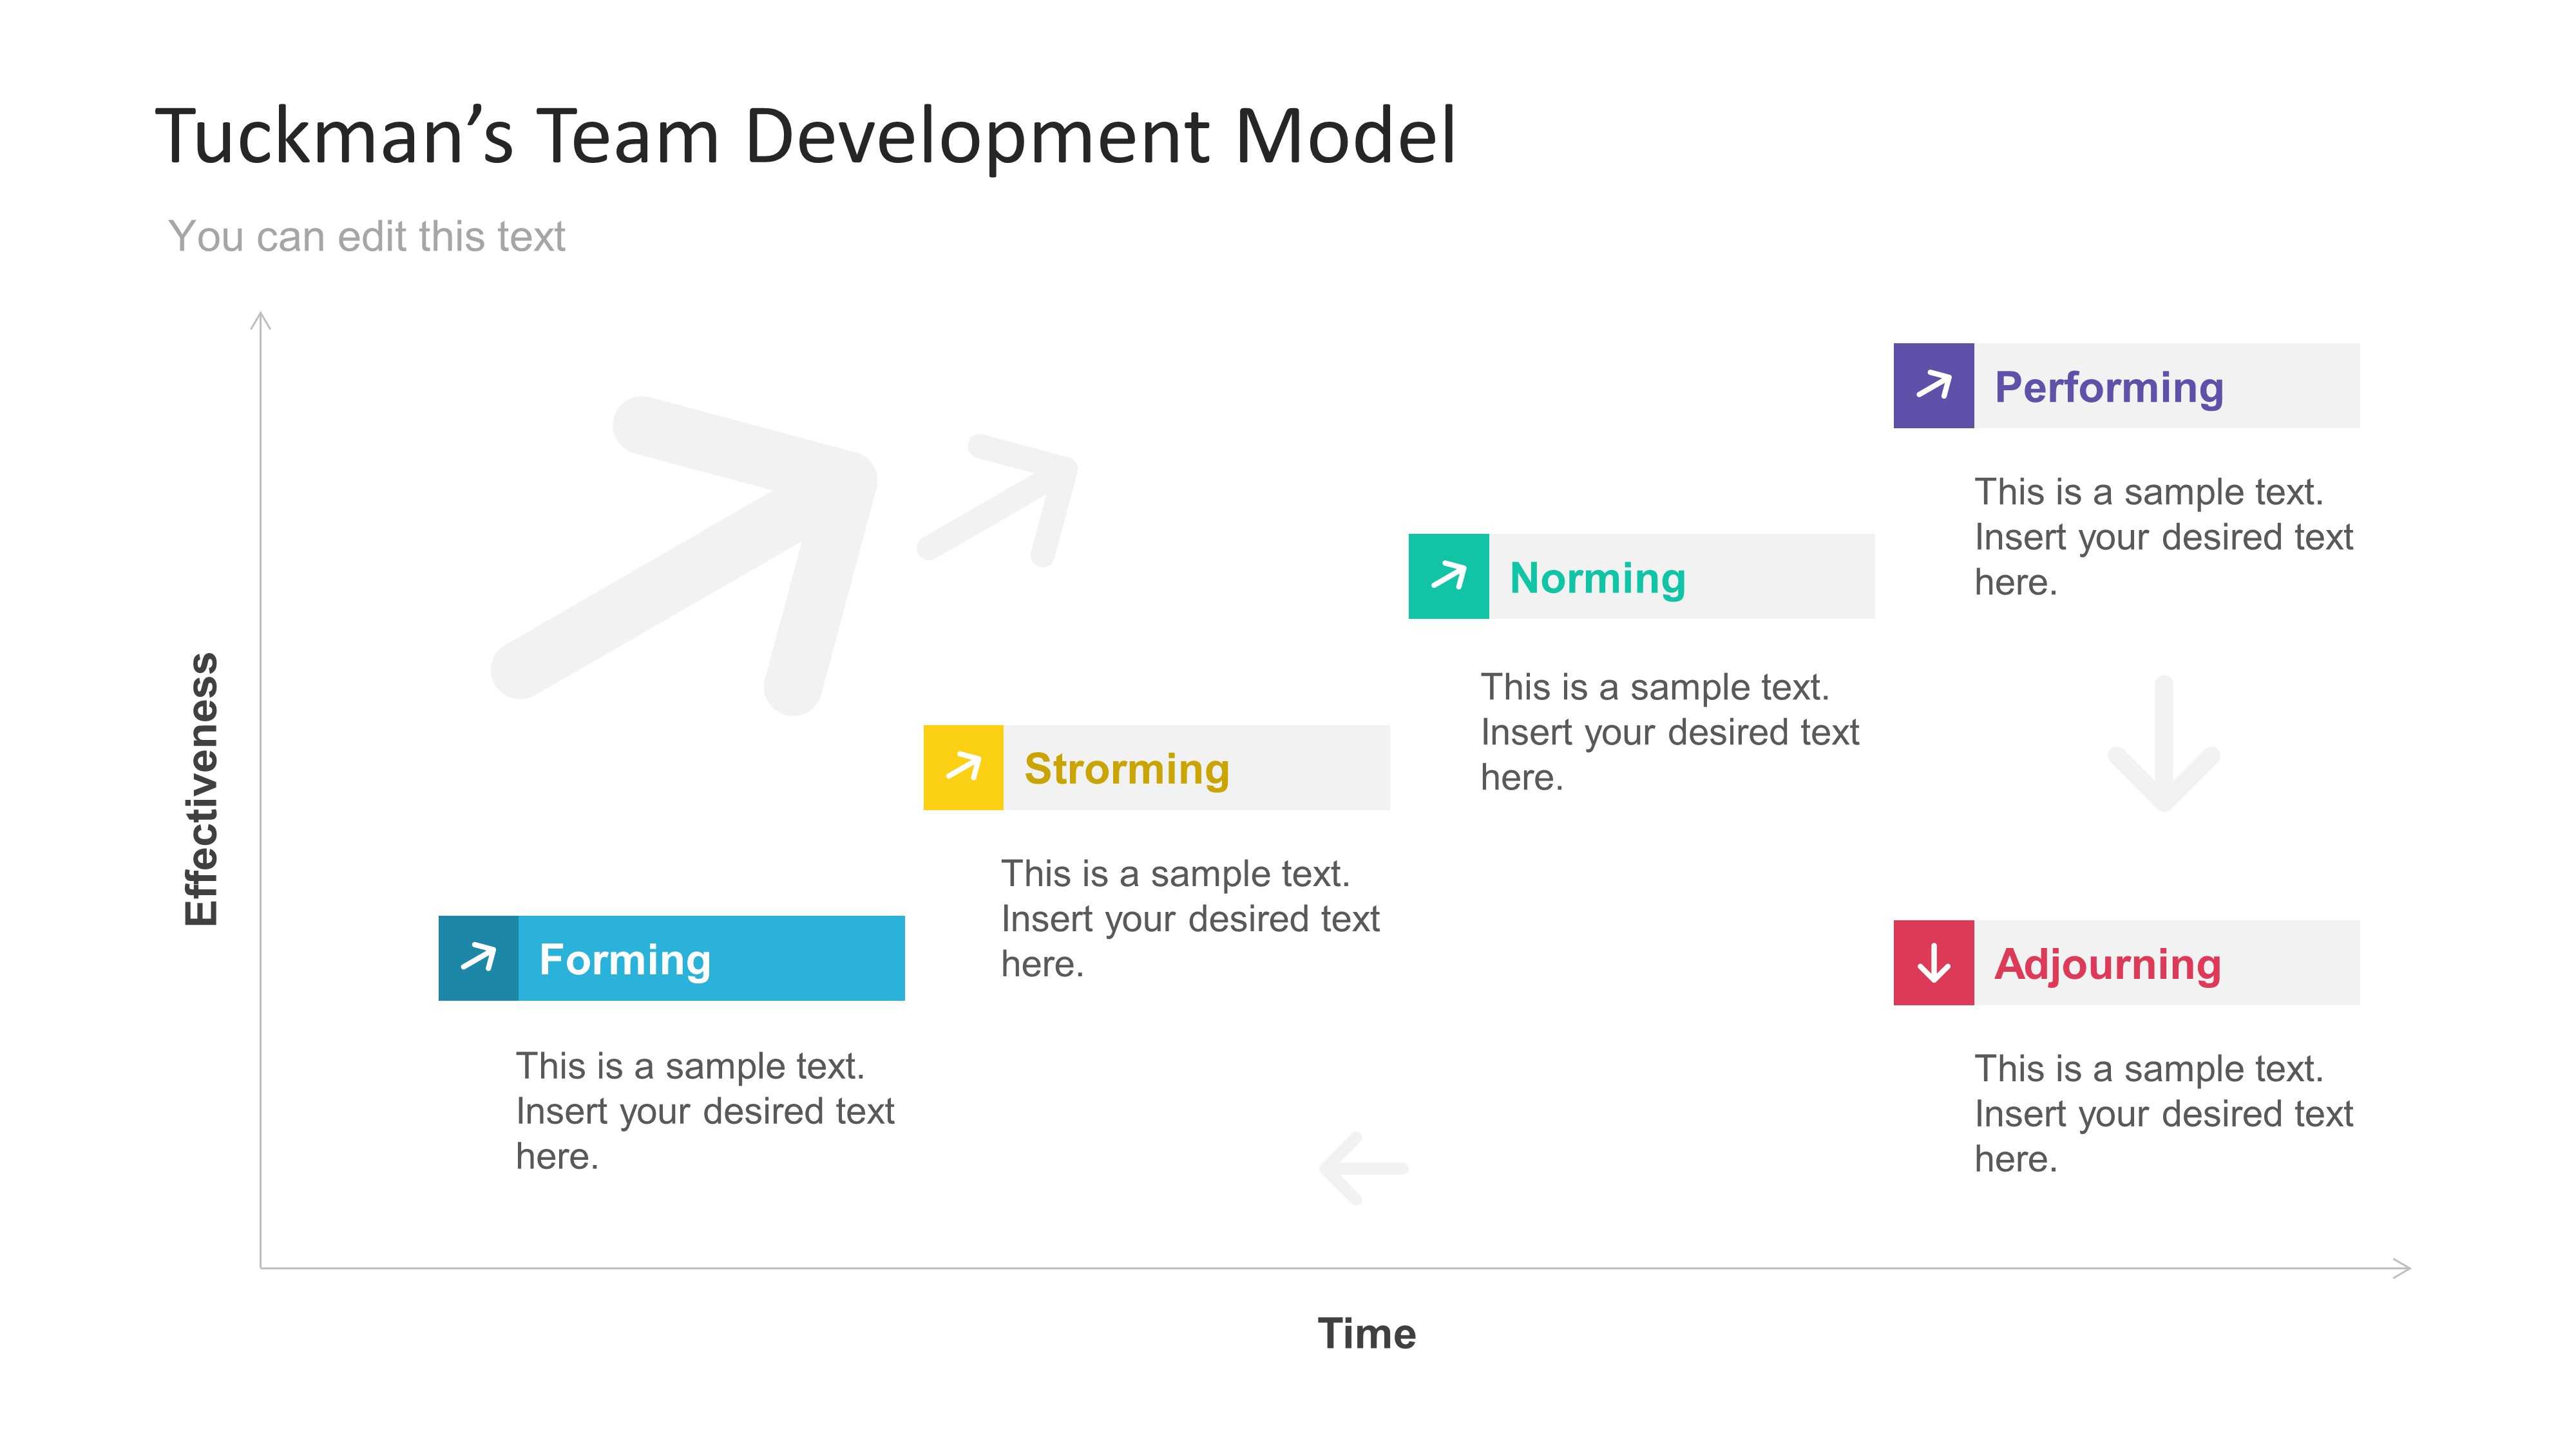 Tuckmans Team Development Model Powerpoint Template Intended For Powerpoint Templates For Communication Presentation